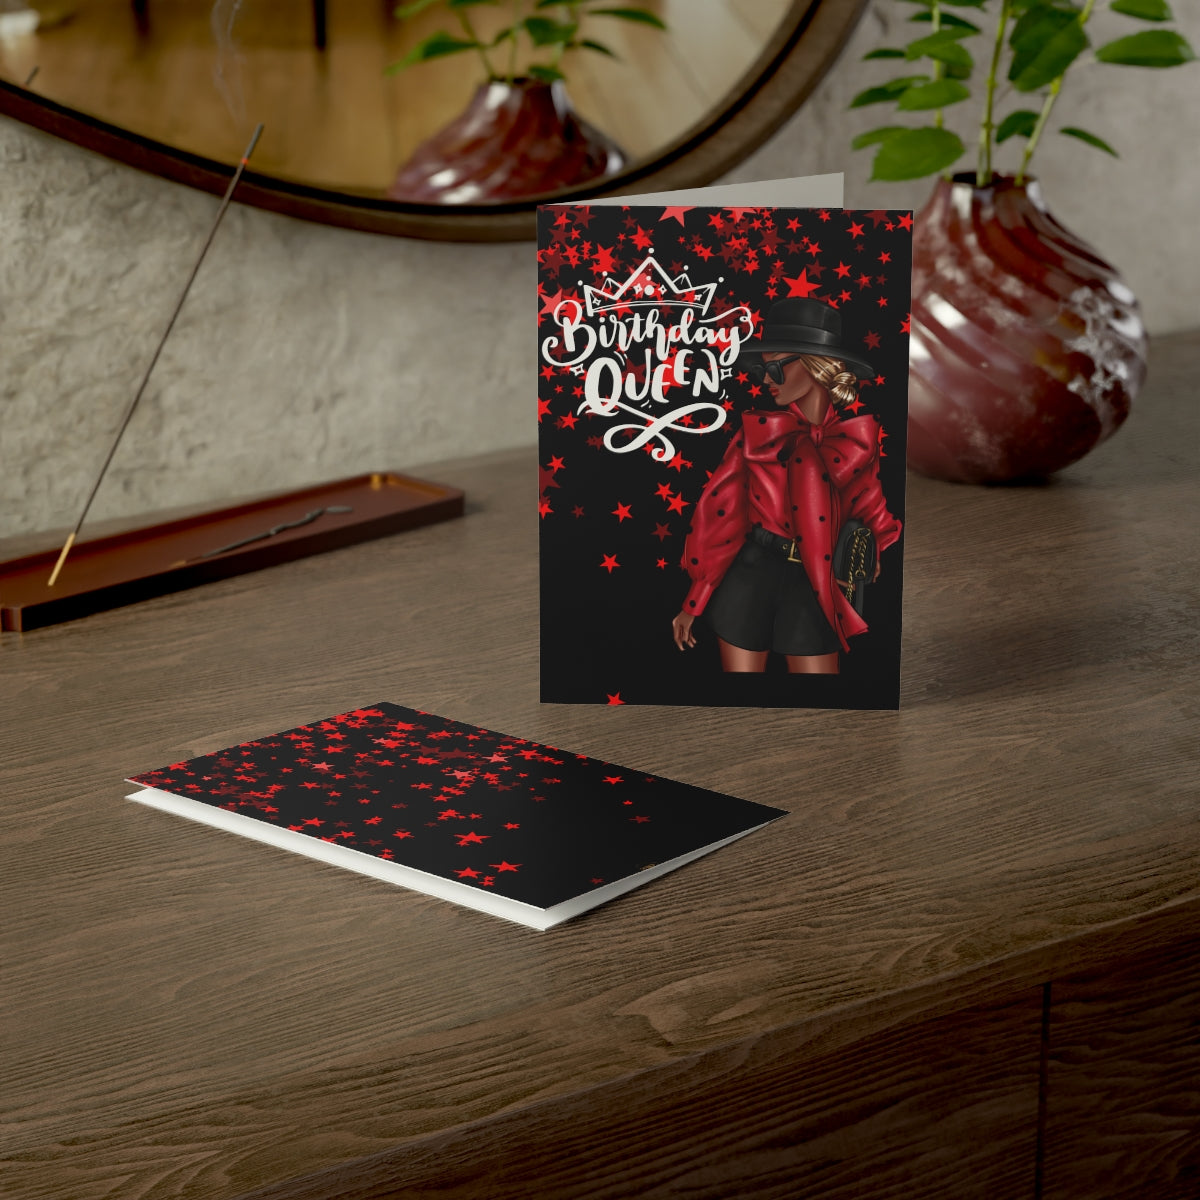 Birthday Queen Greeting Cards (1, 10, 30, and 50pcs)| Black Girl Birthday Card